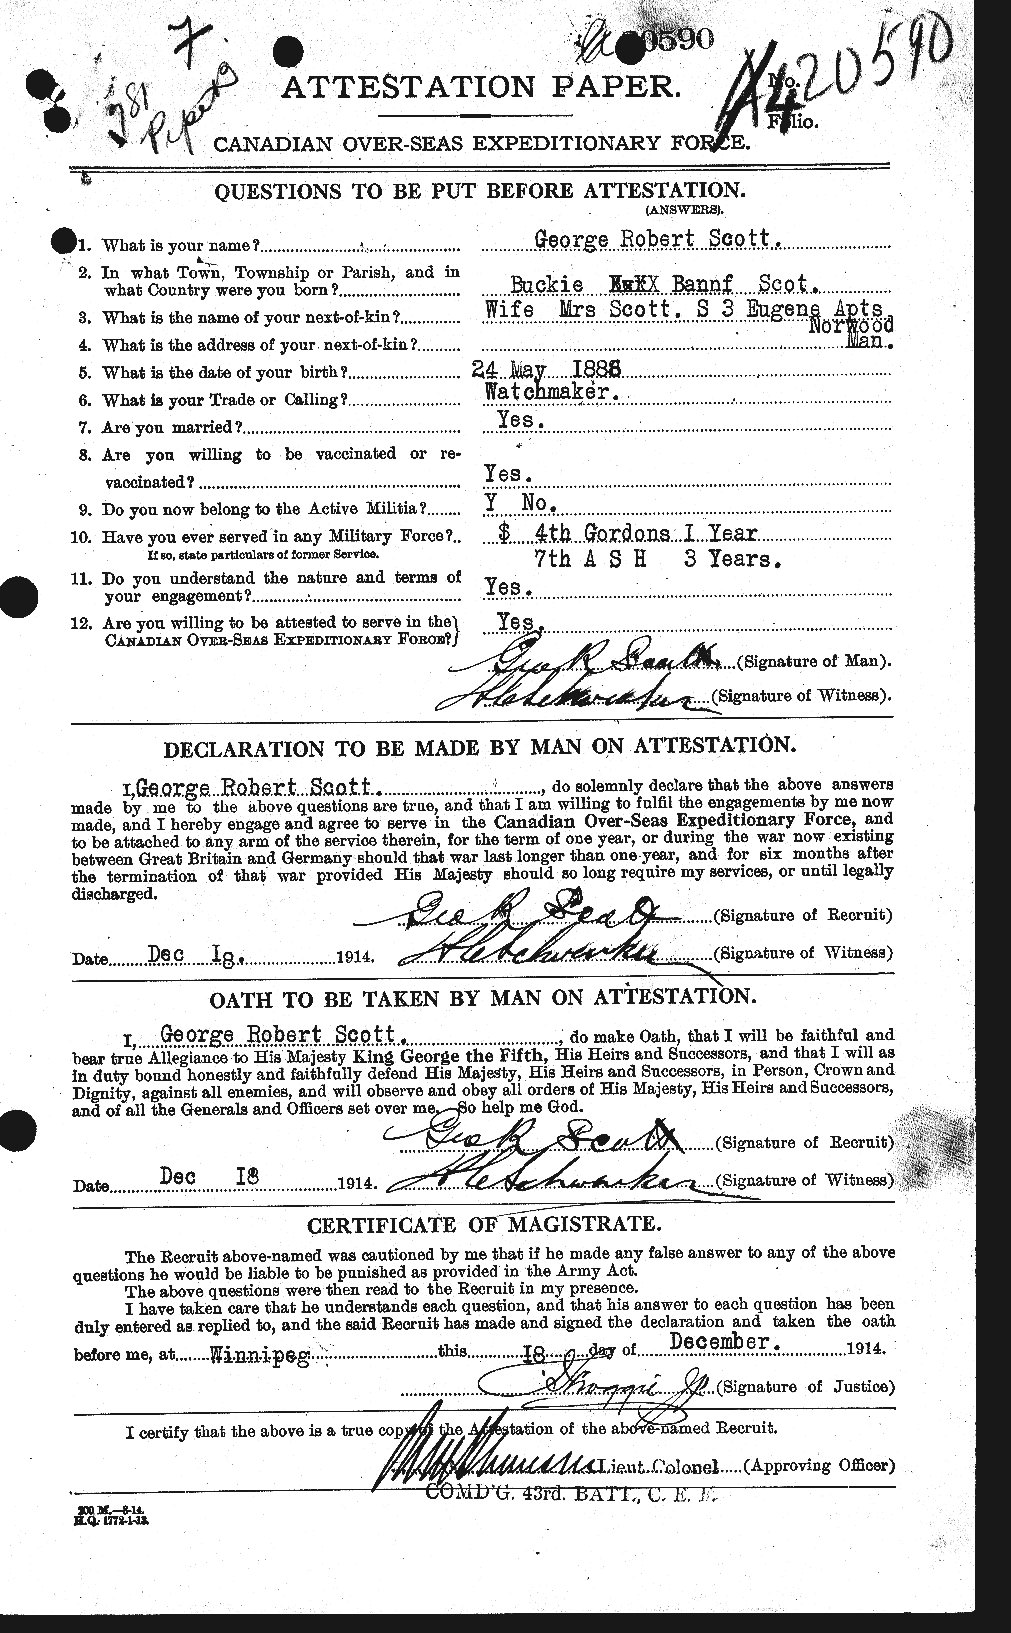 Personnel Records of the First World War - CEF 083152a